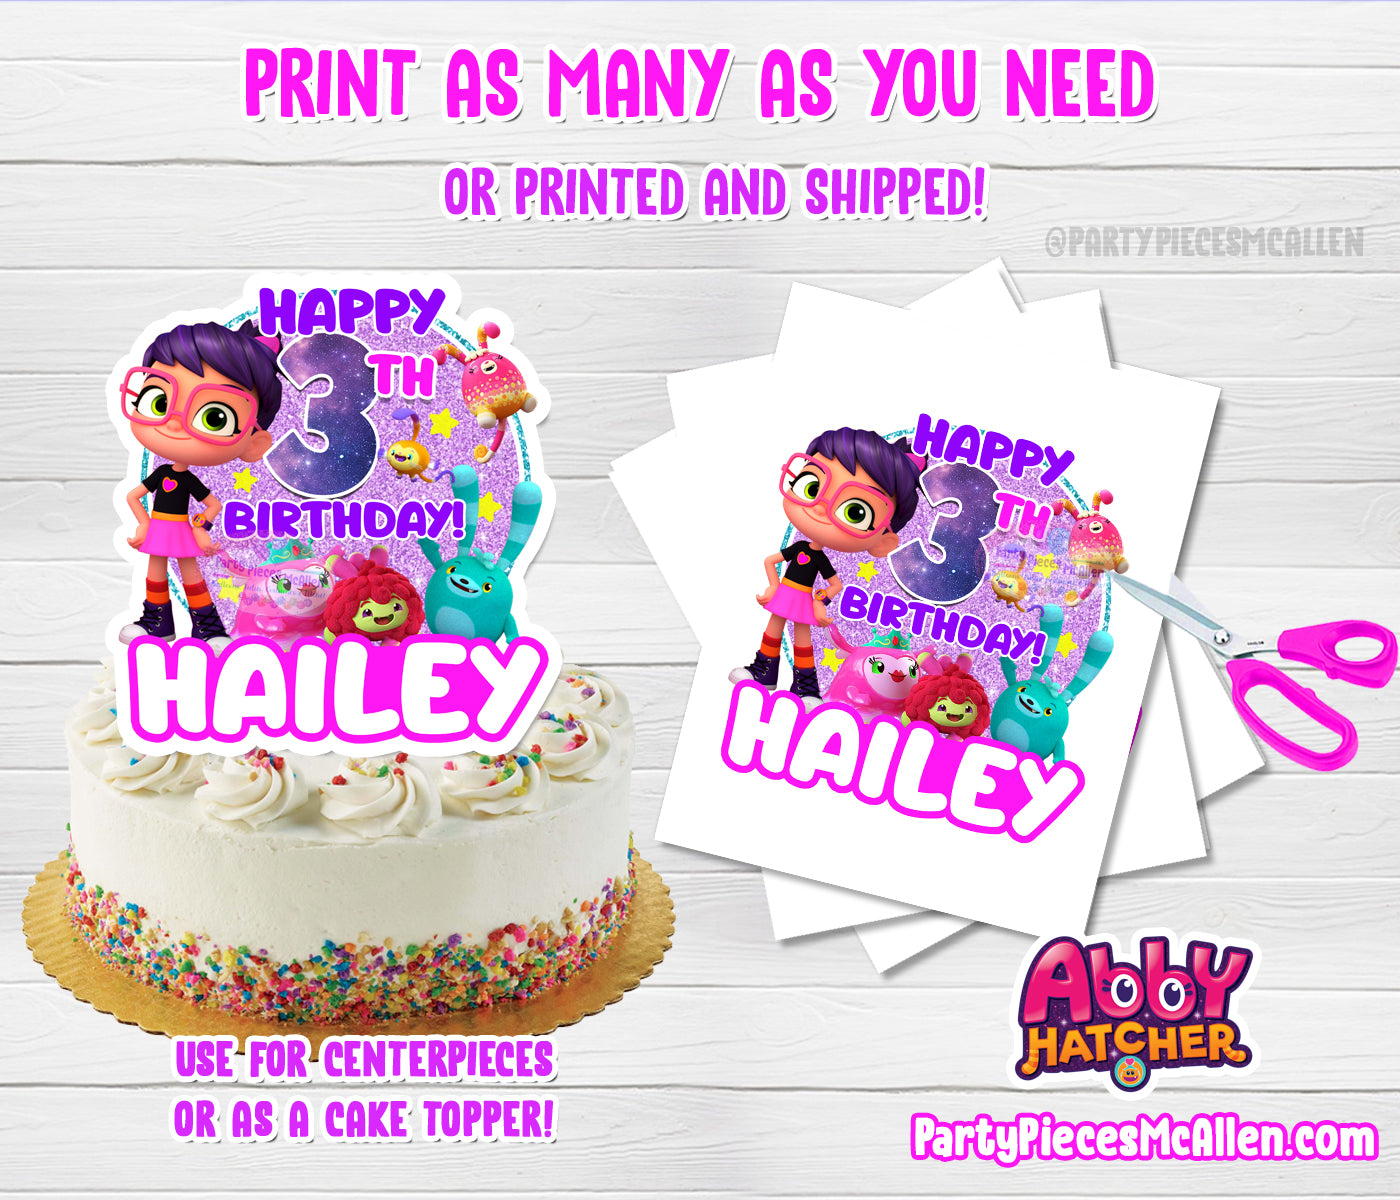 ABBY HATCHER CAKE TOPPER  Cake toppers, Topper, Birthday supplies